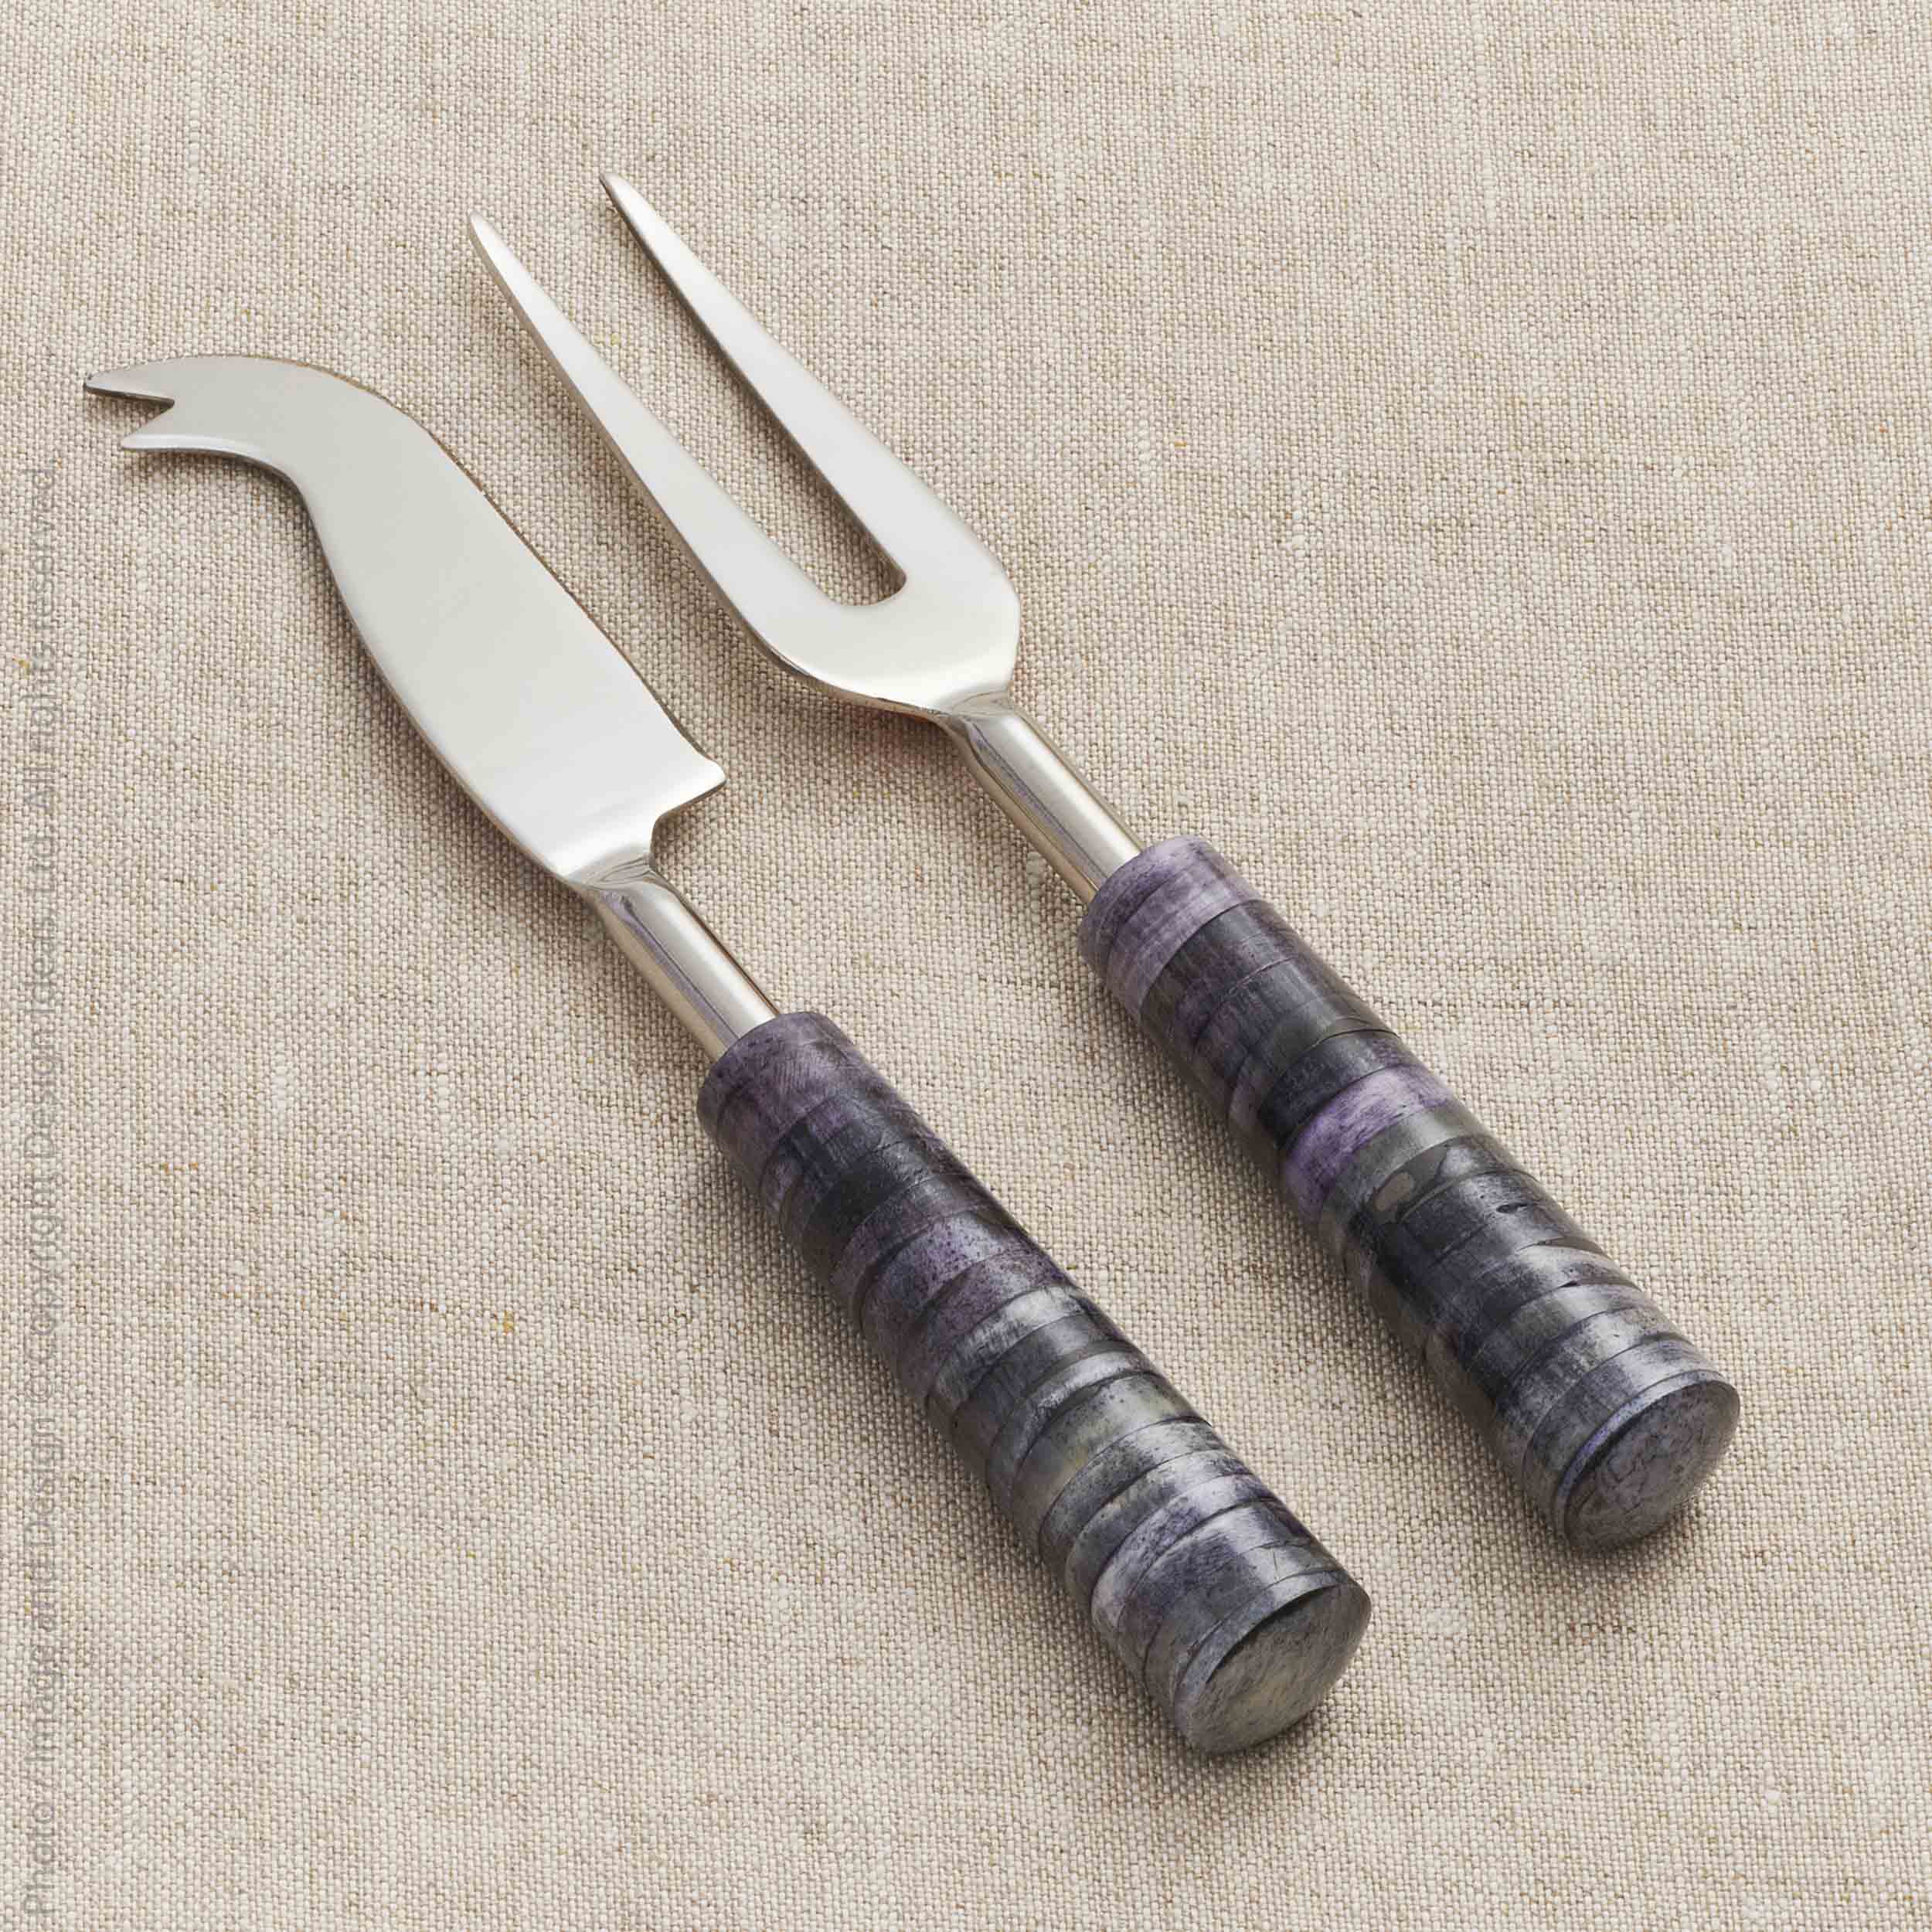 Fiori™ Handmade Stainless Steel and Bone Cheese Knives (set of 2) - (colors: Multi) | Premium Utensils from the Fiori™ collection | made with Stainless Steel and Bone for long lasting use